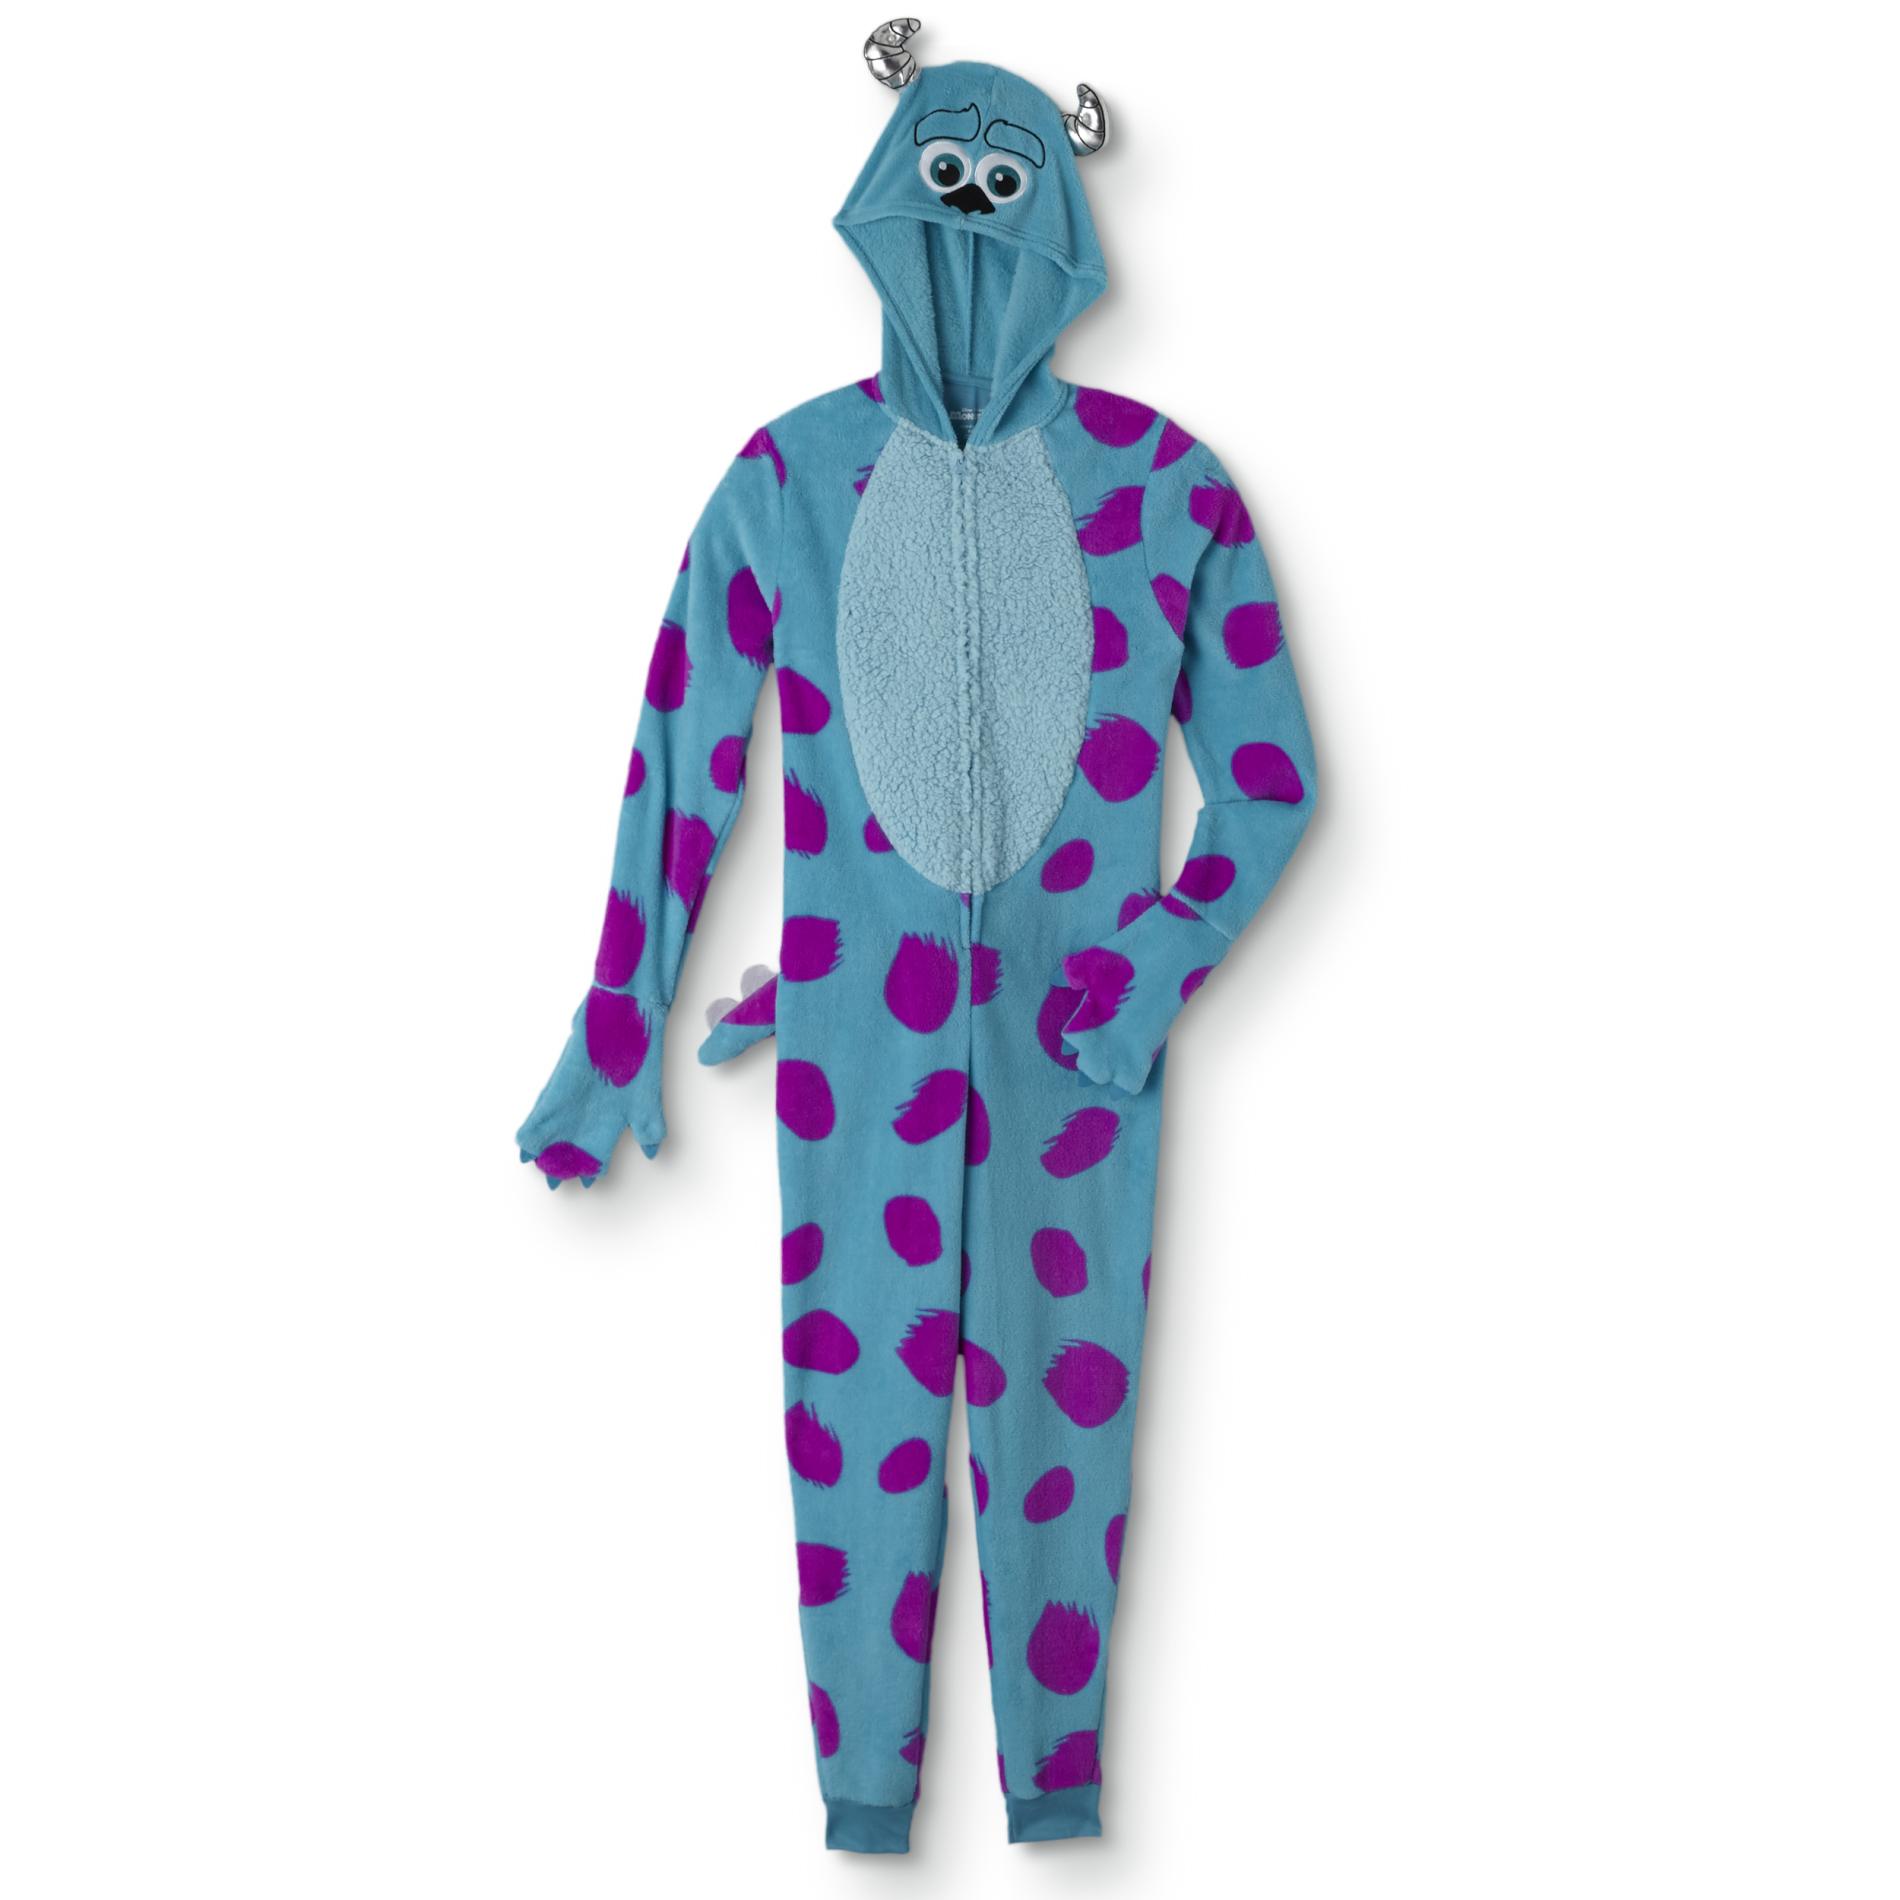 Monsters, Inc. Women's Hooded One-Piece Pajamas - Sulley